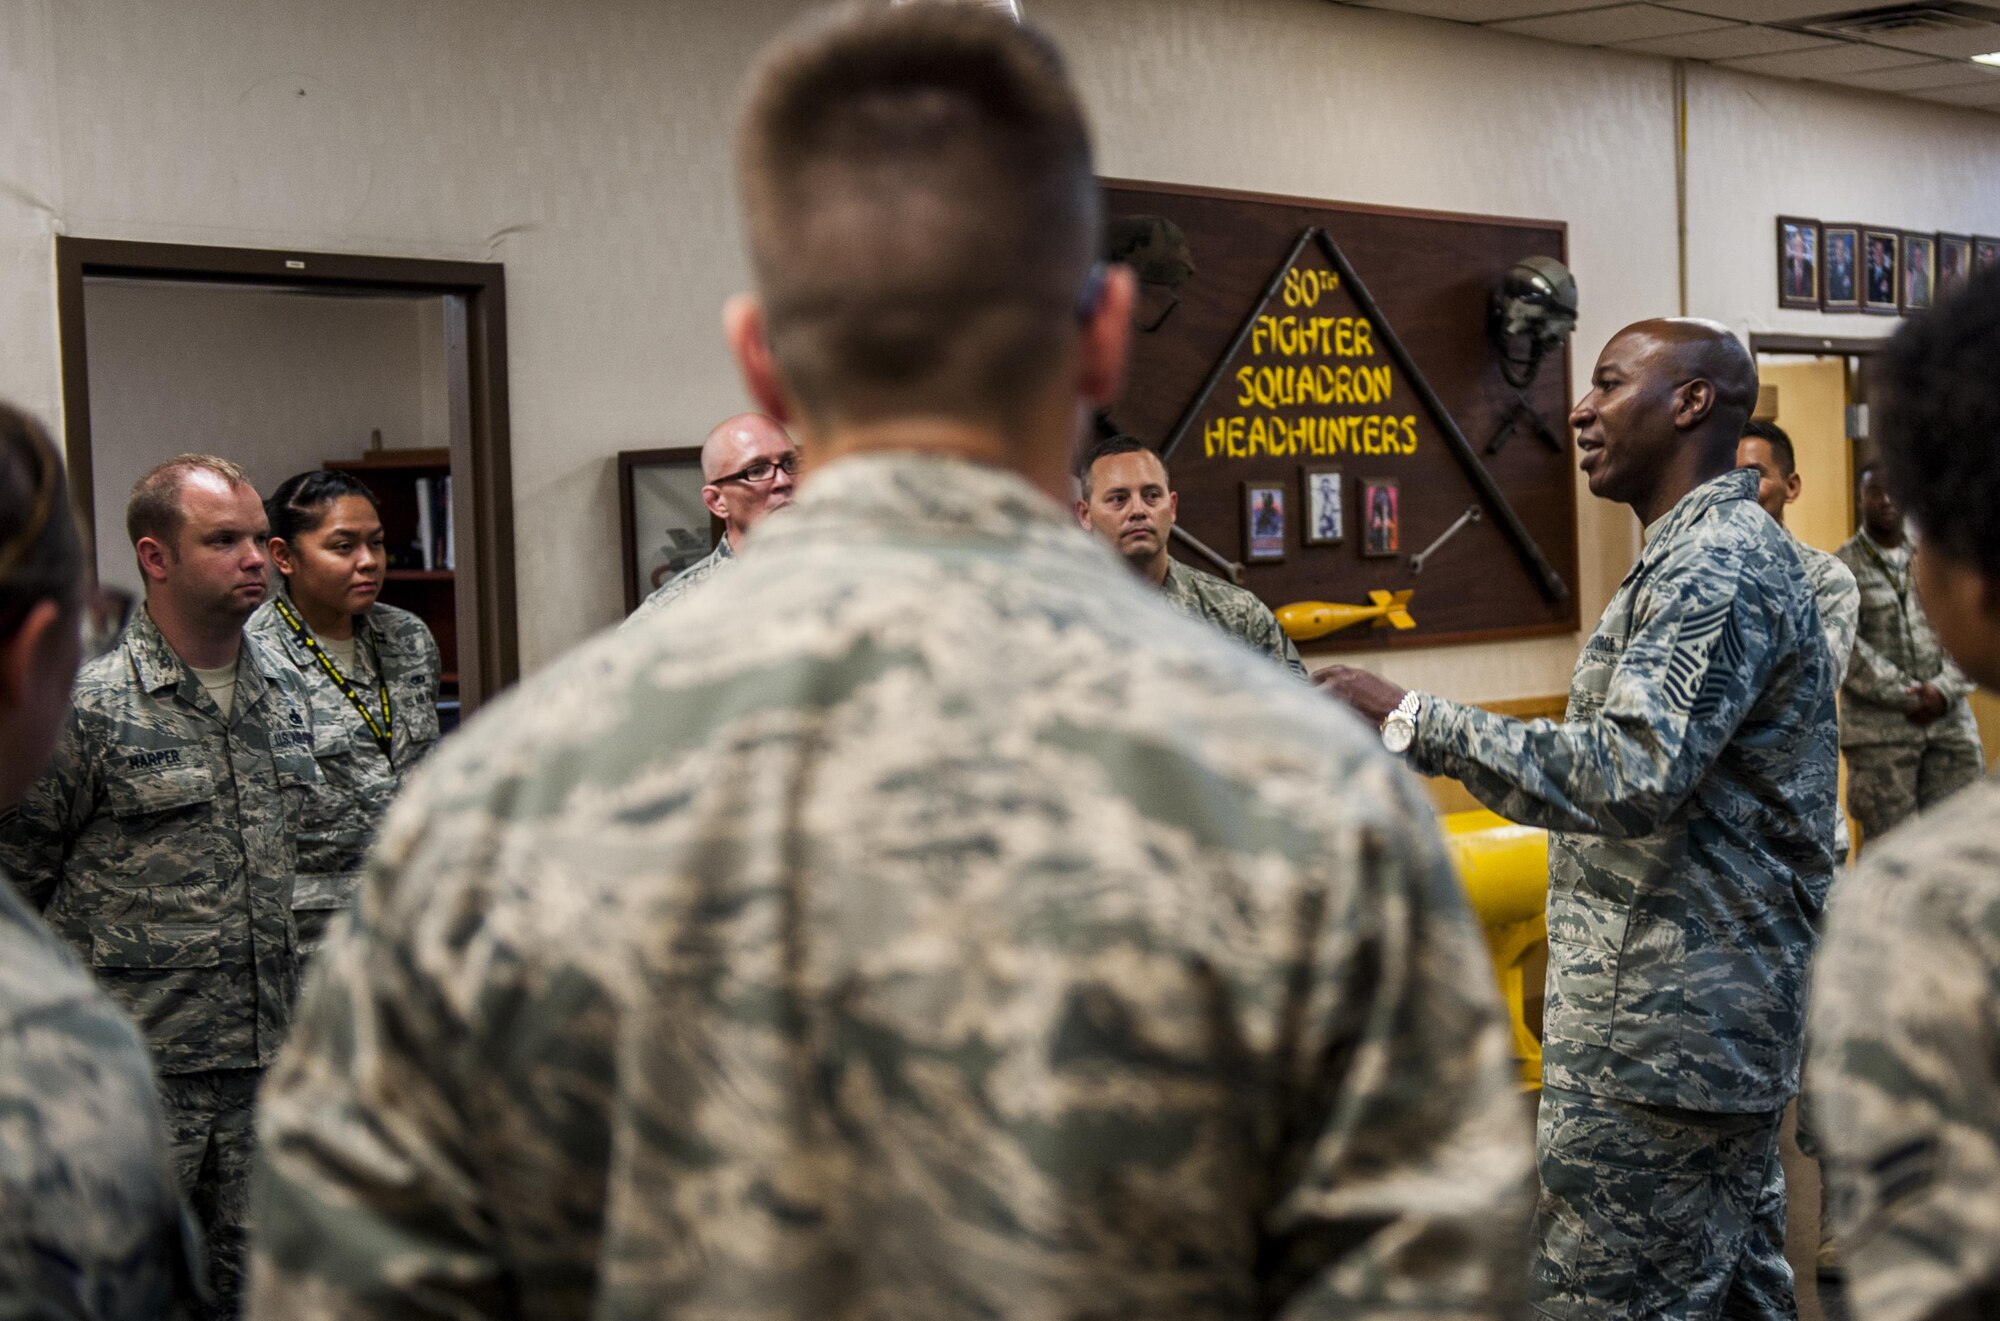 Chief Master Sgt. of the Air Force Kaleth O. Wright speaks to members of the 80th Fighter Squadron as he takes a tour of the squadrons at Kunsan Air Base, Republic of Korea, June 6, 2017. Wright is the 18th Chief Master Sergeant of the Air Force. Wright is taking a tour of many bases in the Pacific theater to meet with airmen and discuss his focus areas as CMSAF as well as the Air Force mission. (U.S. Air Force photo by Senior Airman Colville McFee/Released)